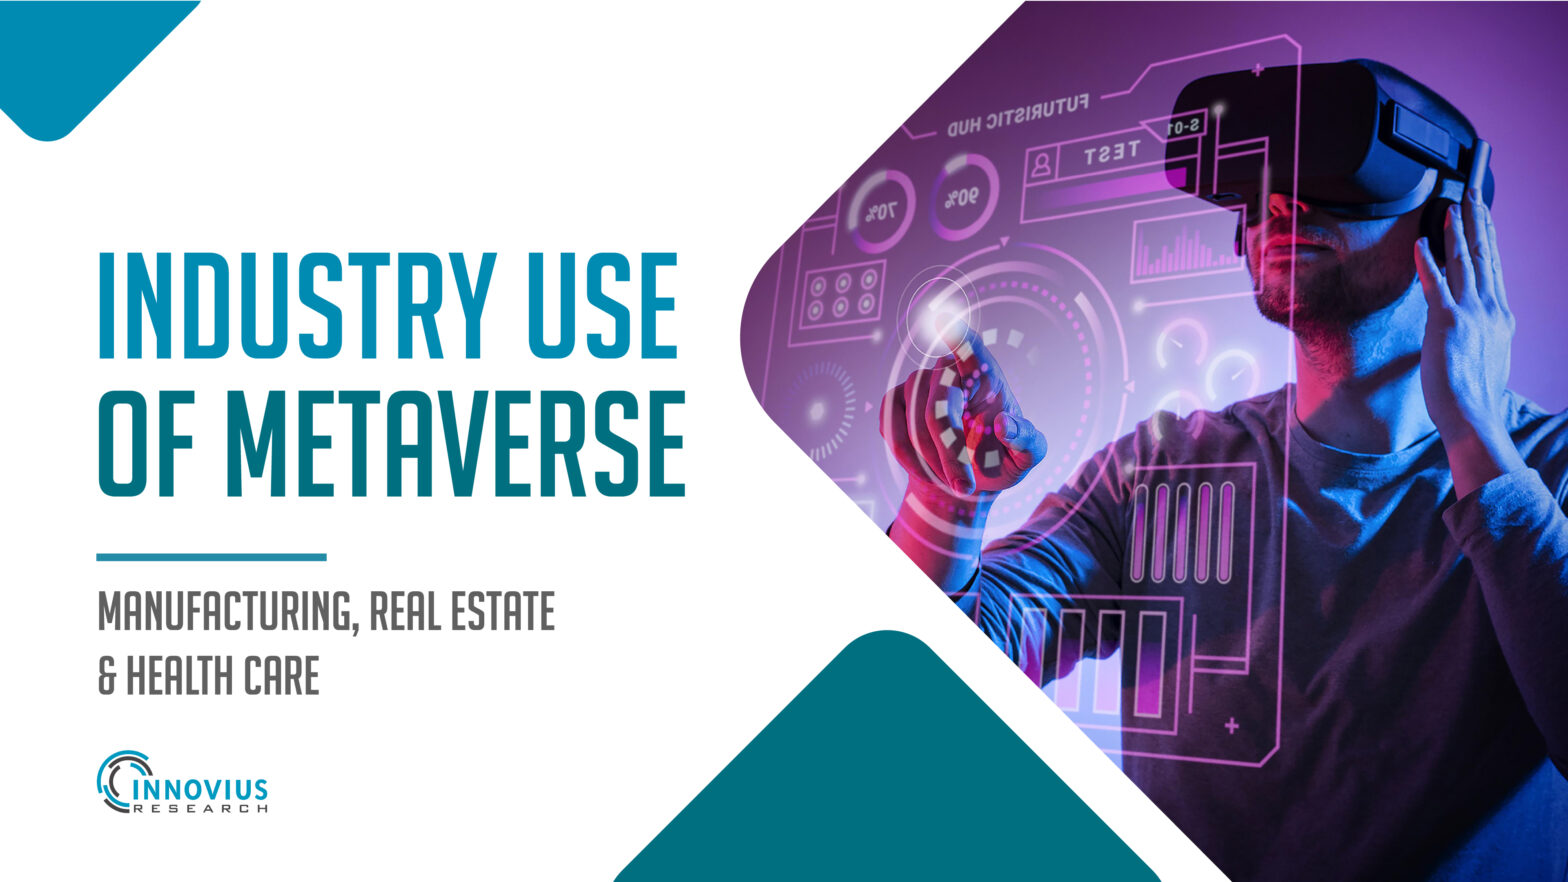 Industry use of metaverse - Innovius Research